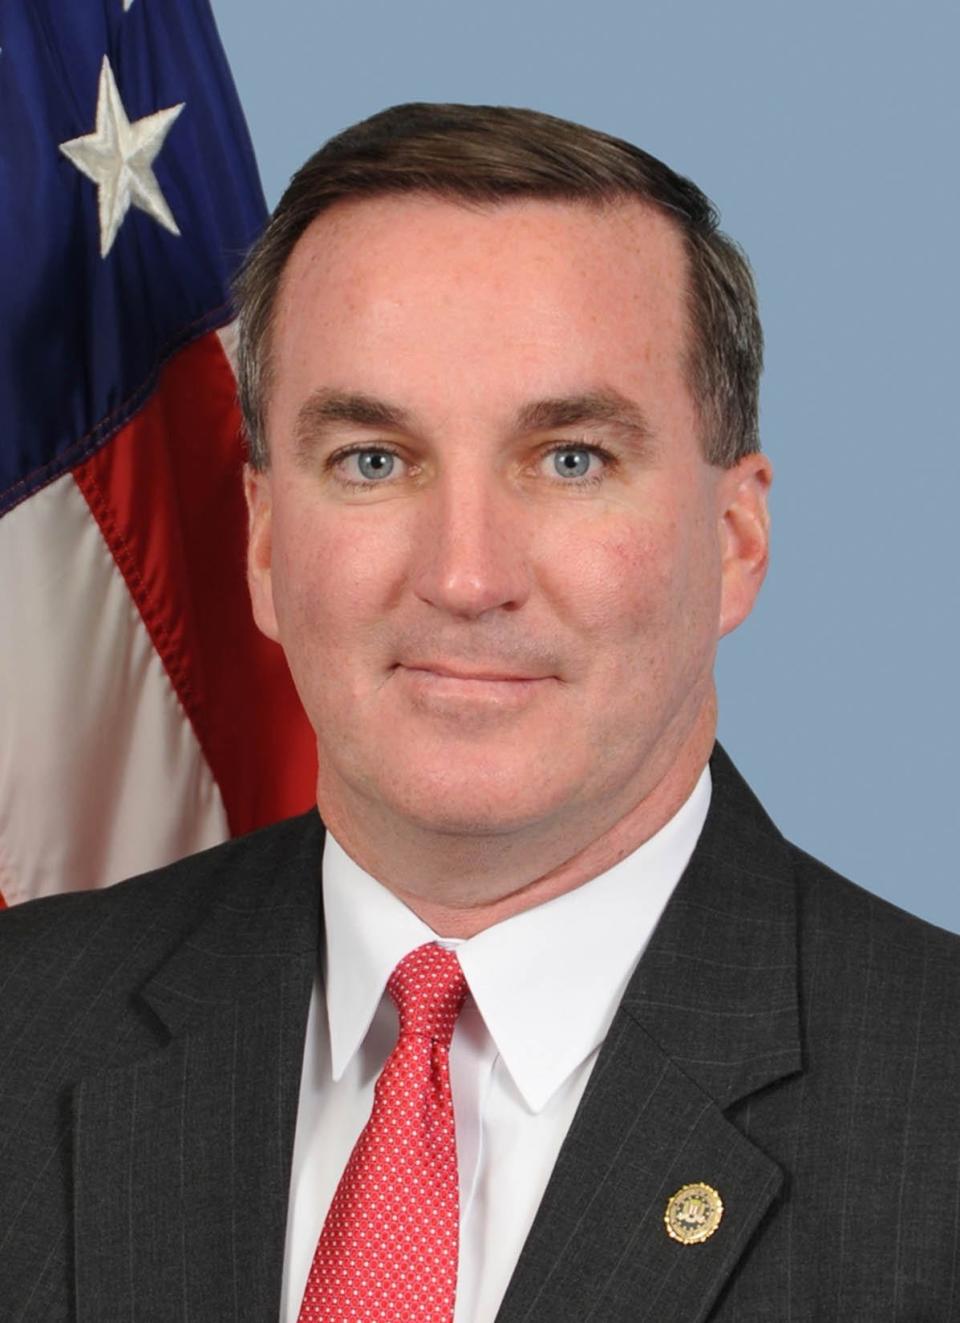 Michael McPherson is the Special Agent in Charge of the FBI’s Tampa Field Office.  The Tampa Field Office is responsible for eighteen counties in Central Florida and has satellite offices in Fort Myers, Sarasota, Clearwater, Lakeland, Orlando, and Melbourne.